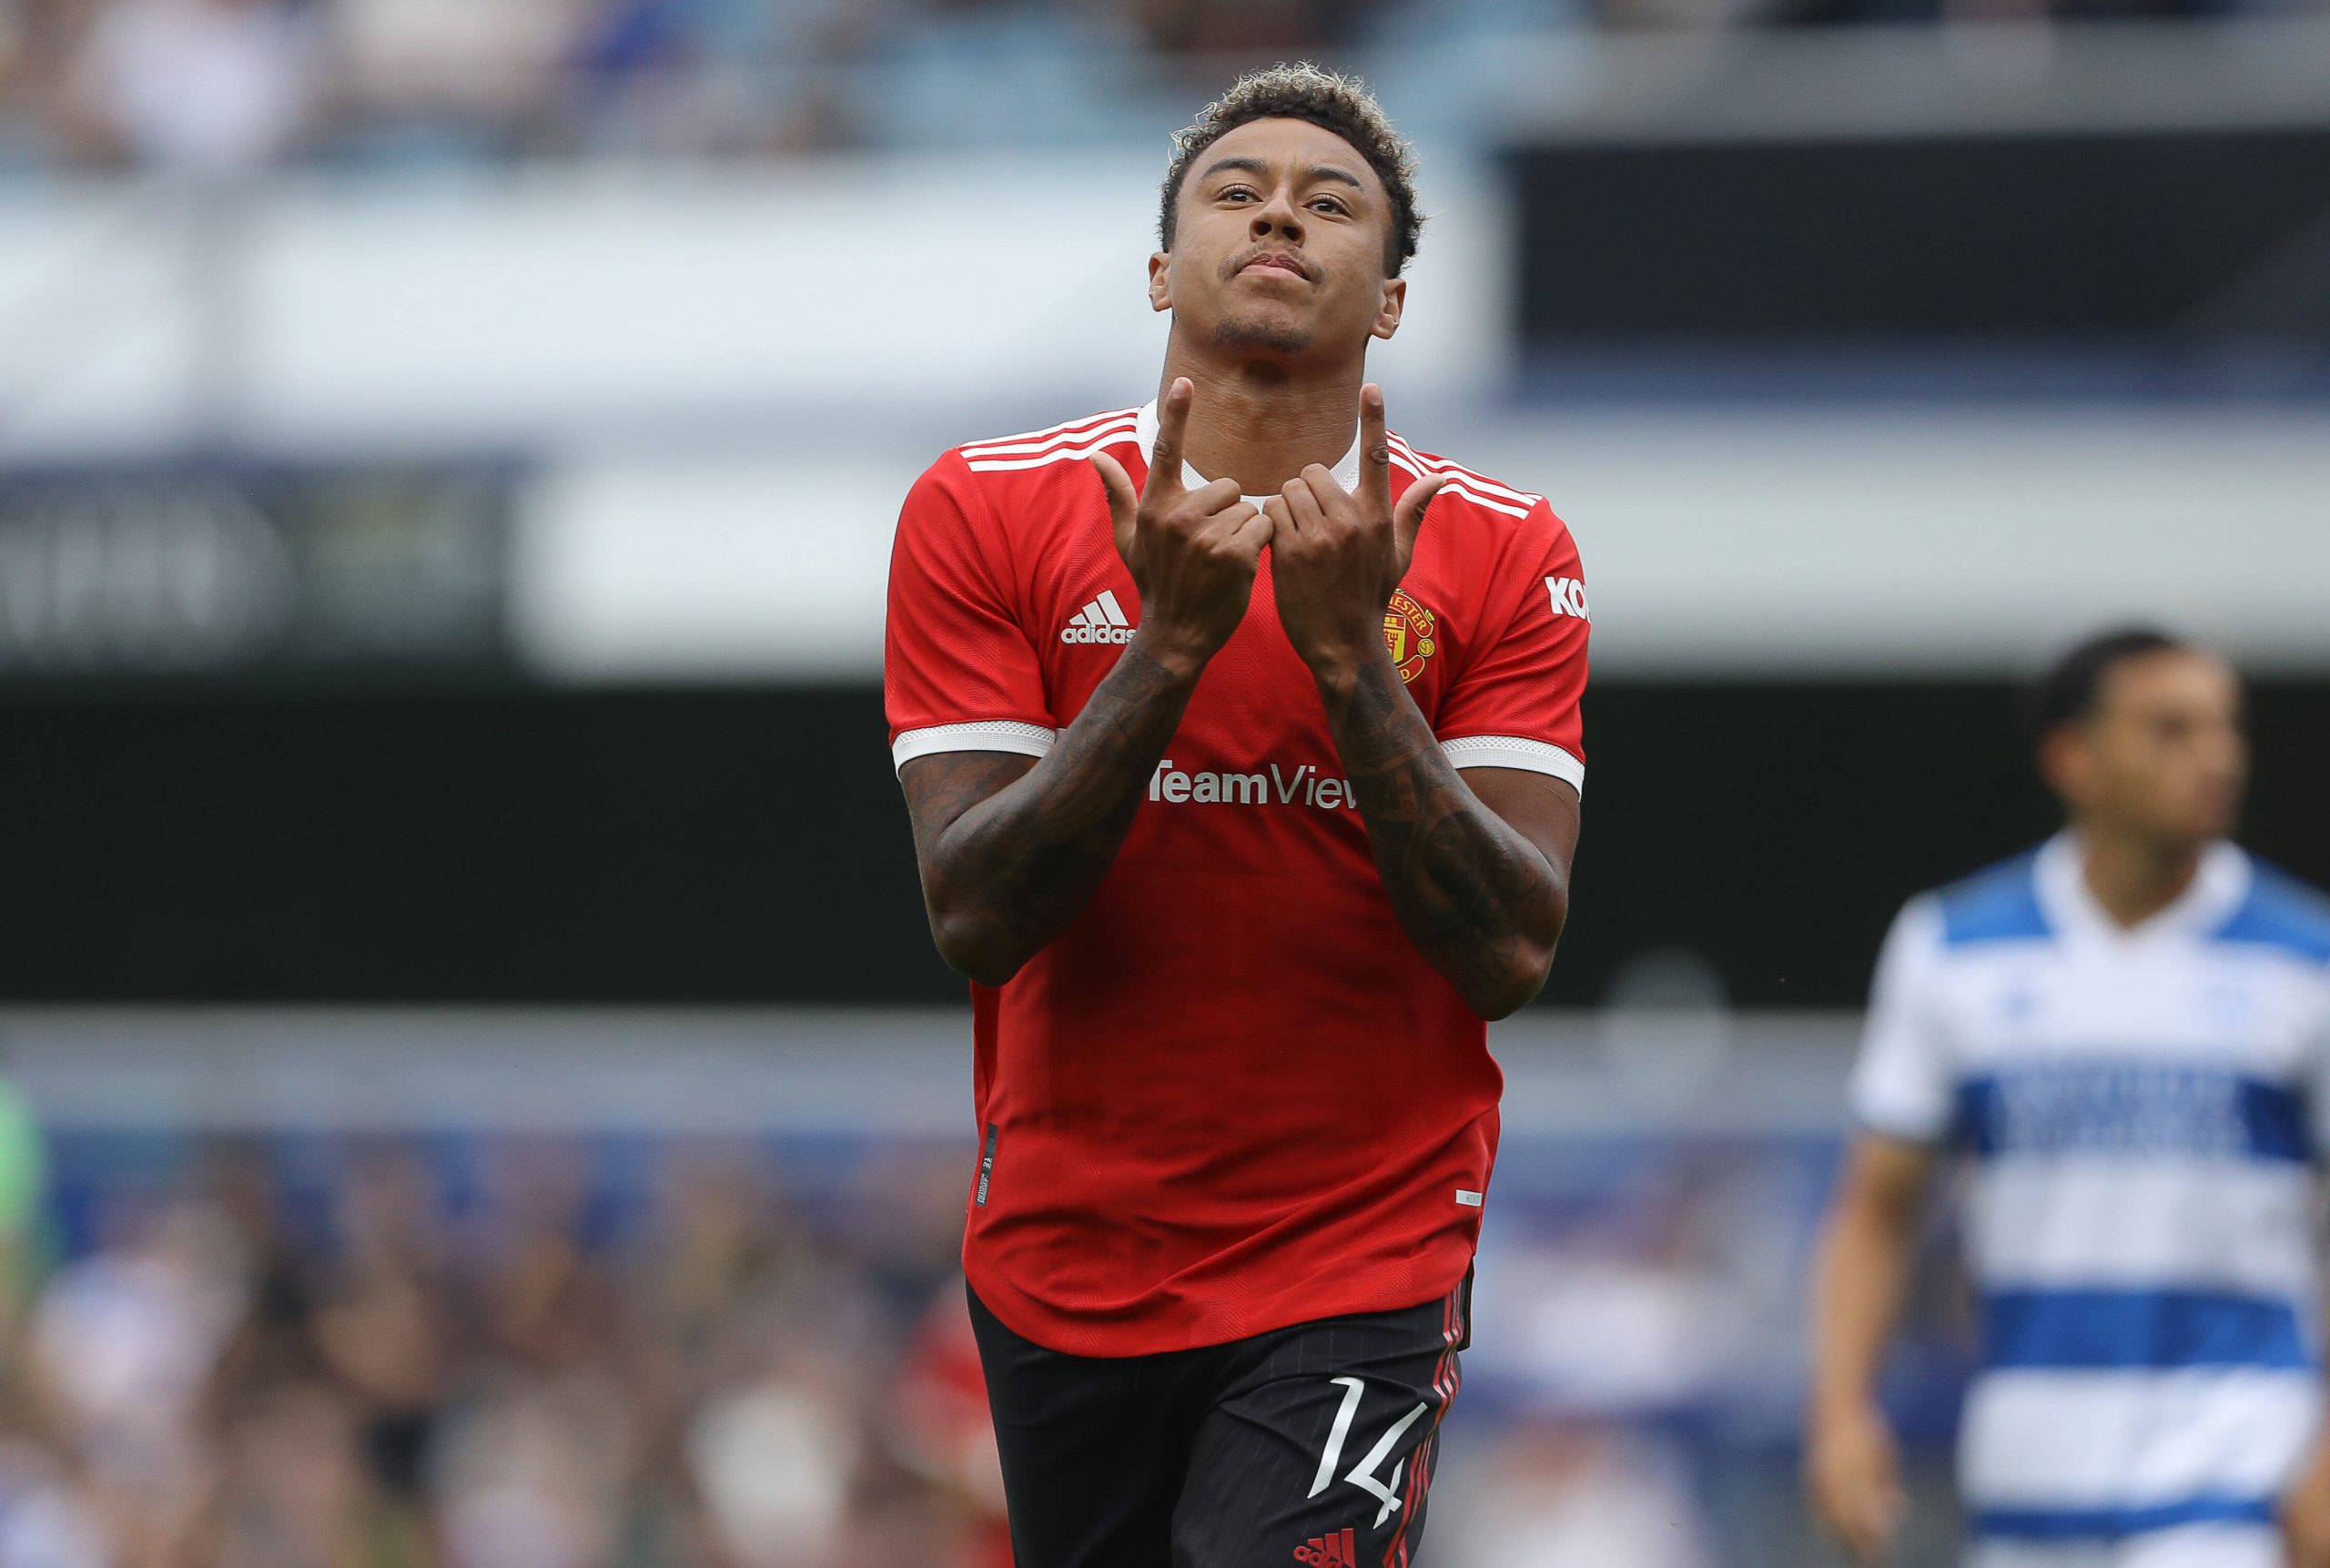 Newcastle United are interested in signing Manchester United star Jesse Lingard on loan.